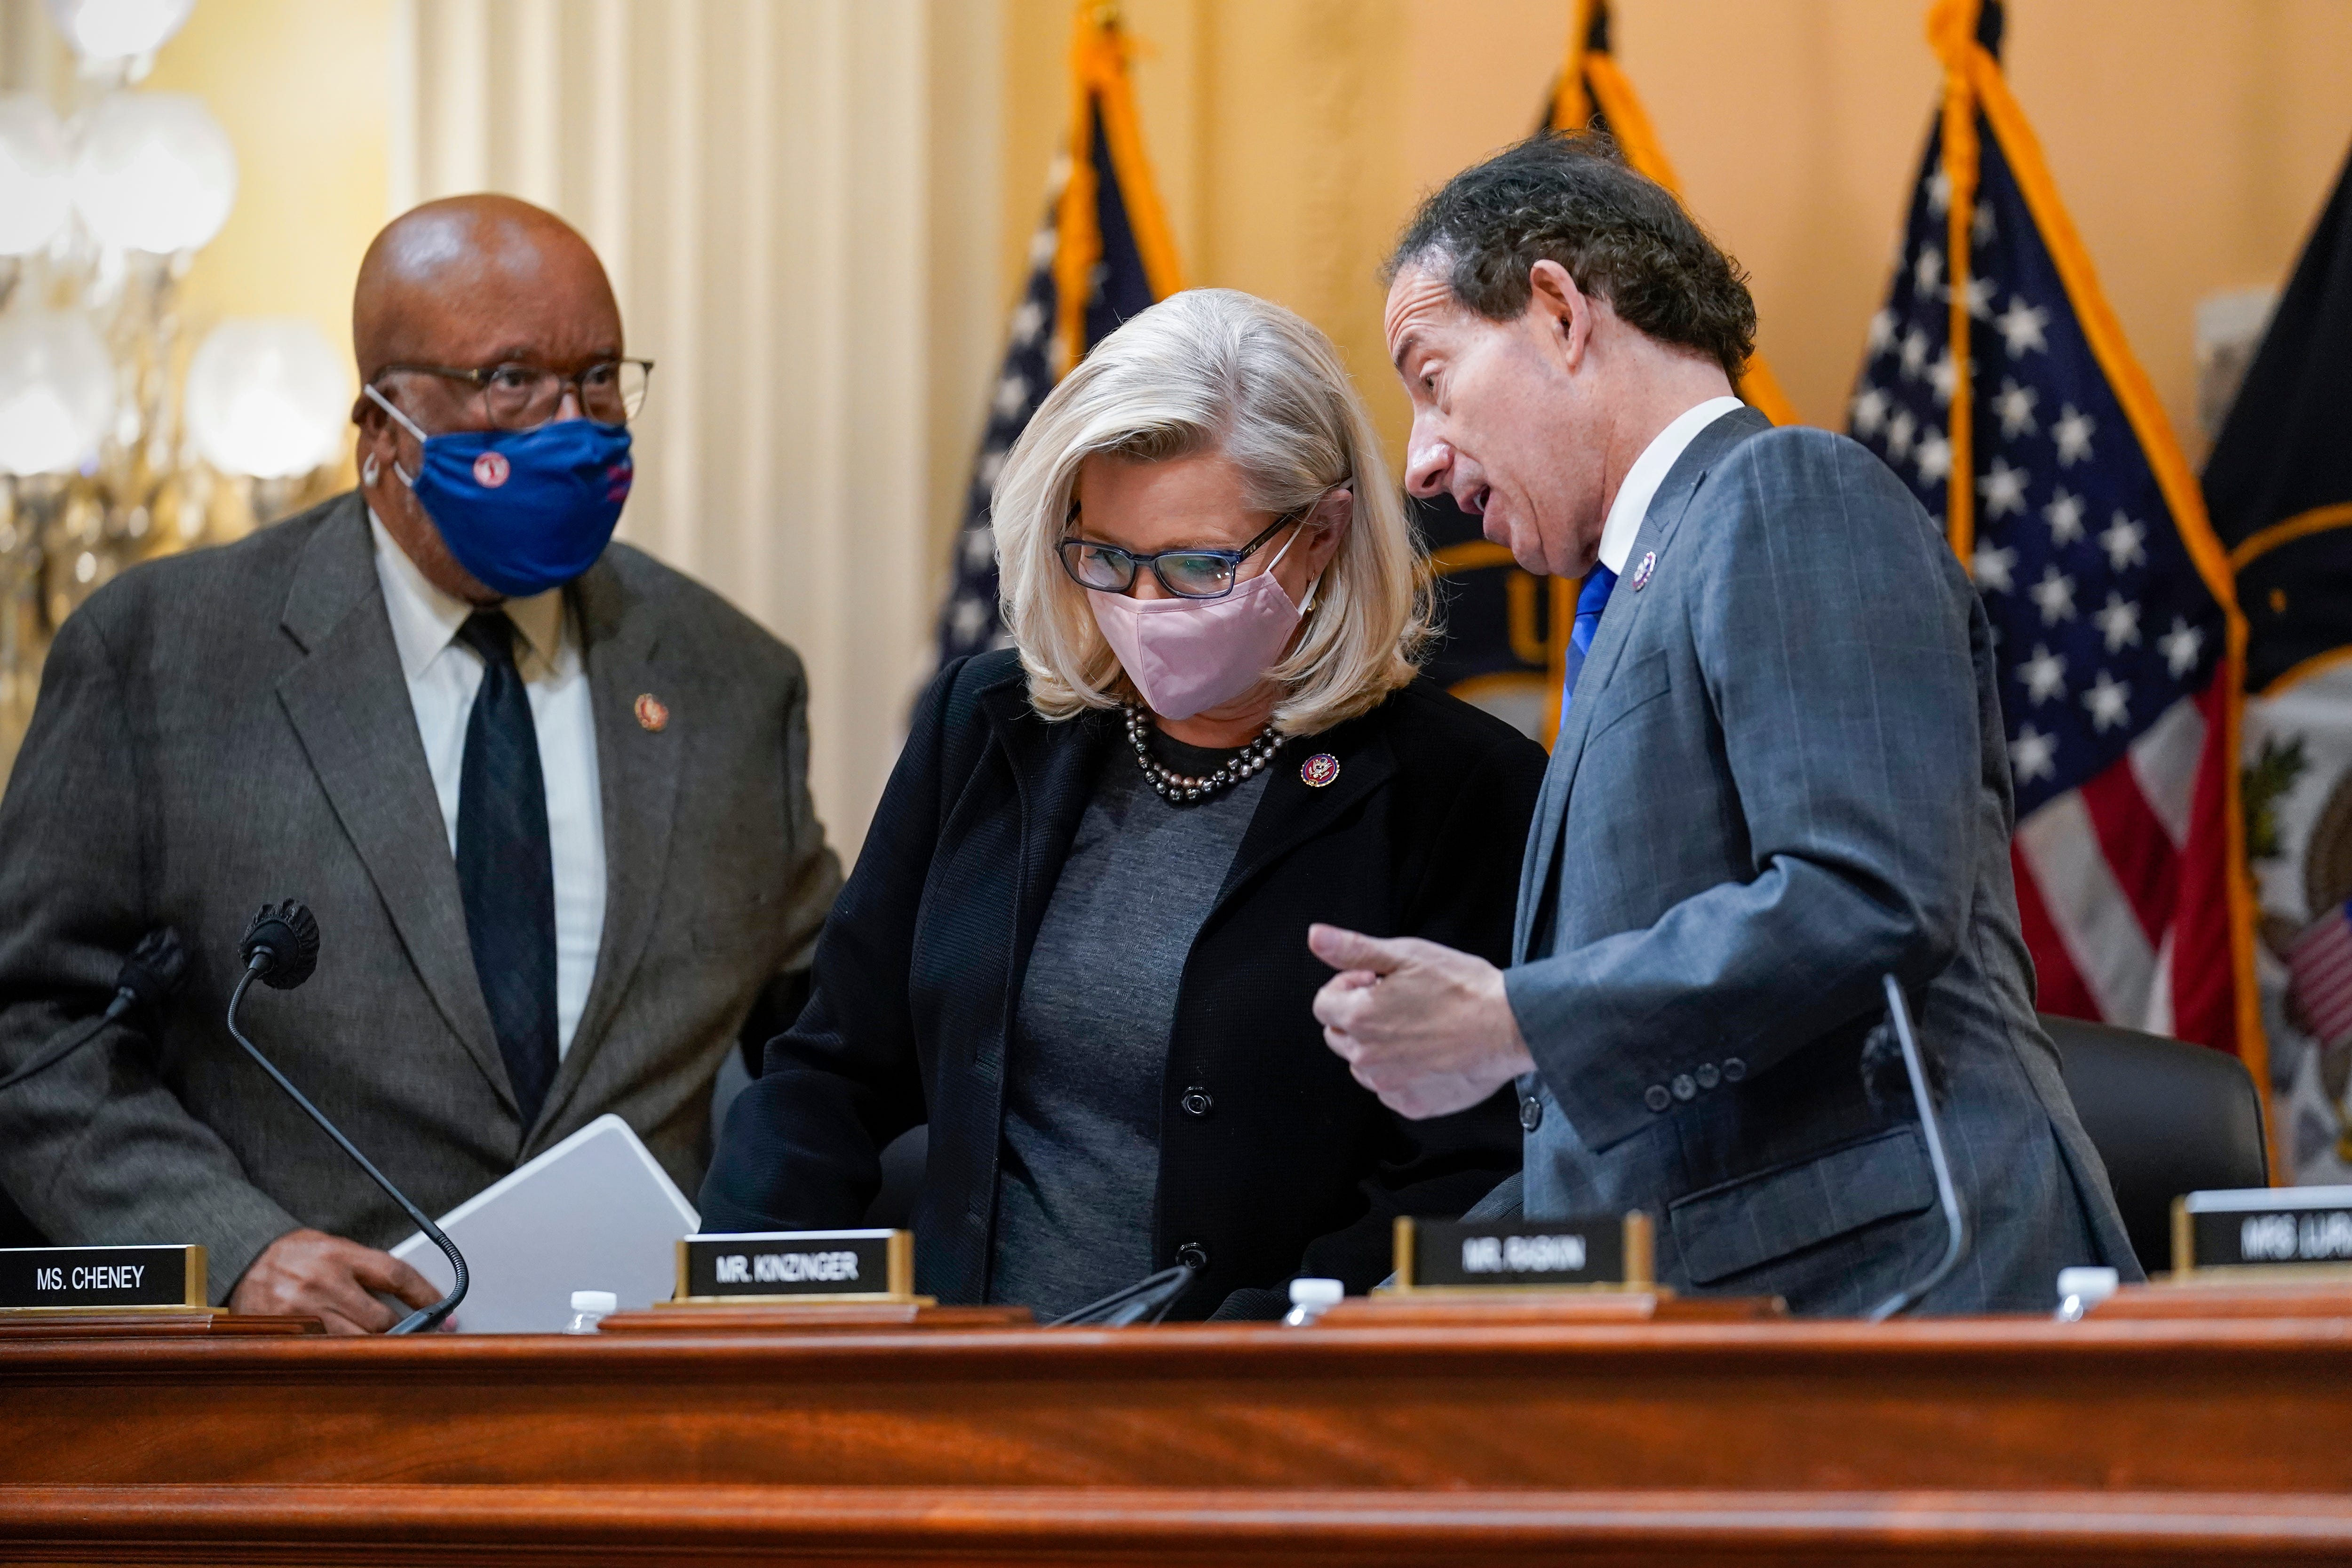 'From left, Jan. 6 committee Chairman Bennie Thompson, D-Miss., Rep. Liz Cheney, R-Wyo., and Rep. Jamie Raskin, D-Md., finish a meeting on Dec. 1, 2021.